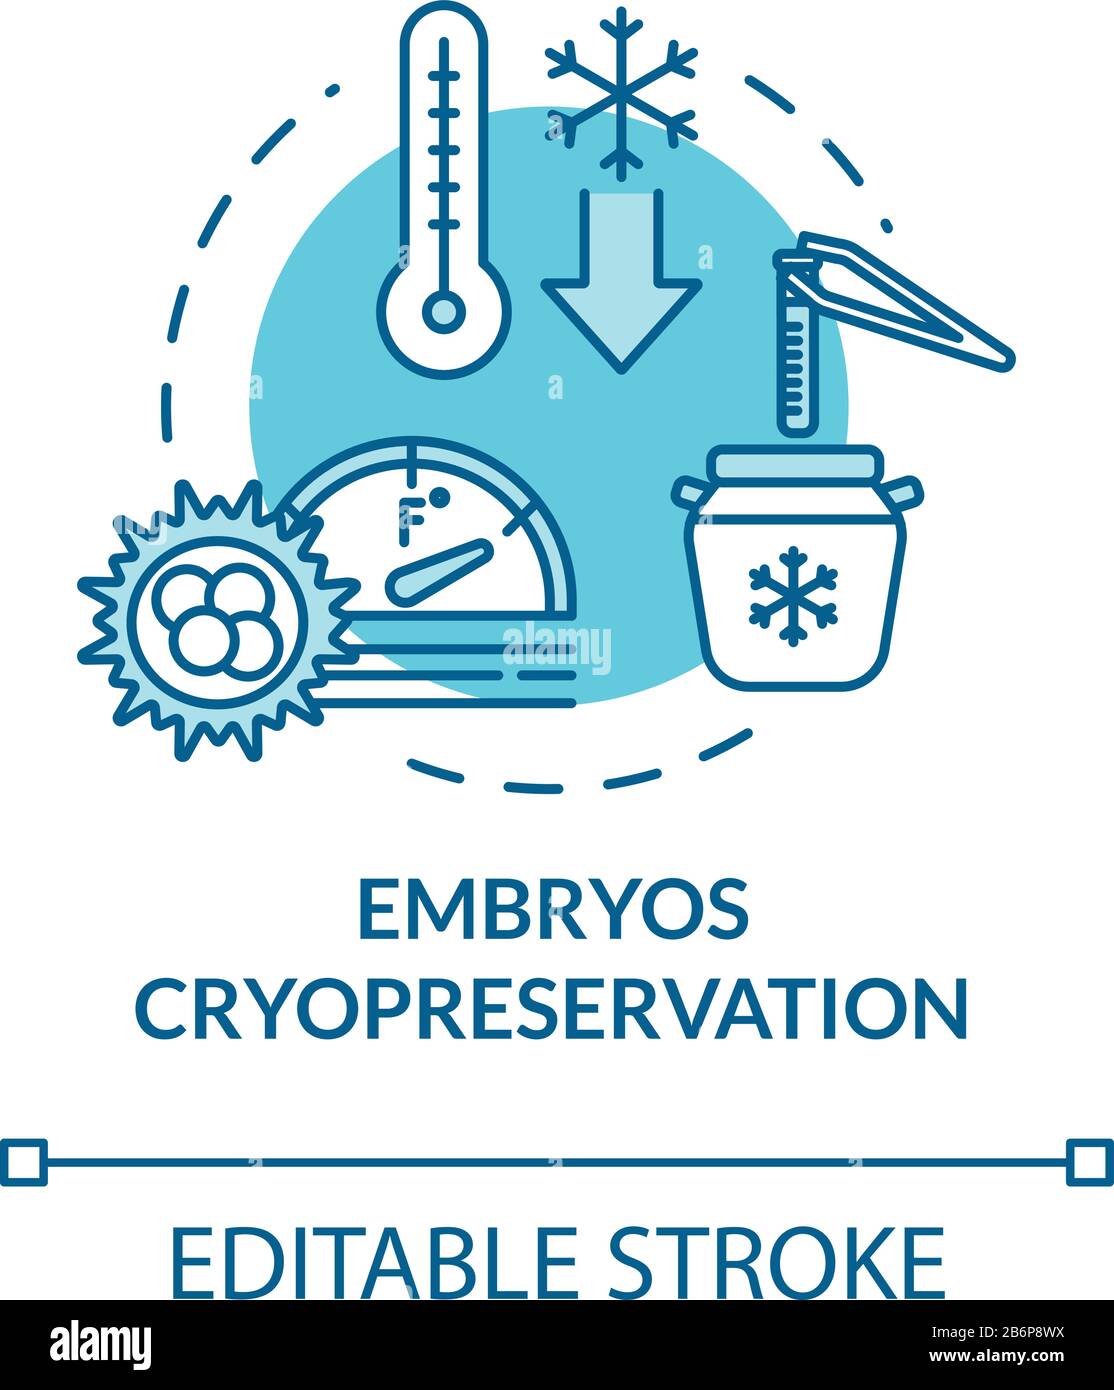 Embryos cryopreservation turquoise concept icon. Female cell donation. Infertility treatment. Reproductive tech idea thin line illustration. Vector Stock Vector